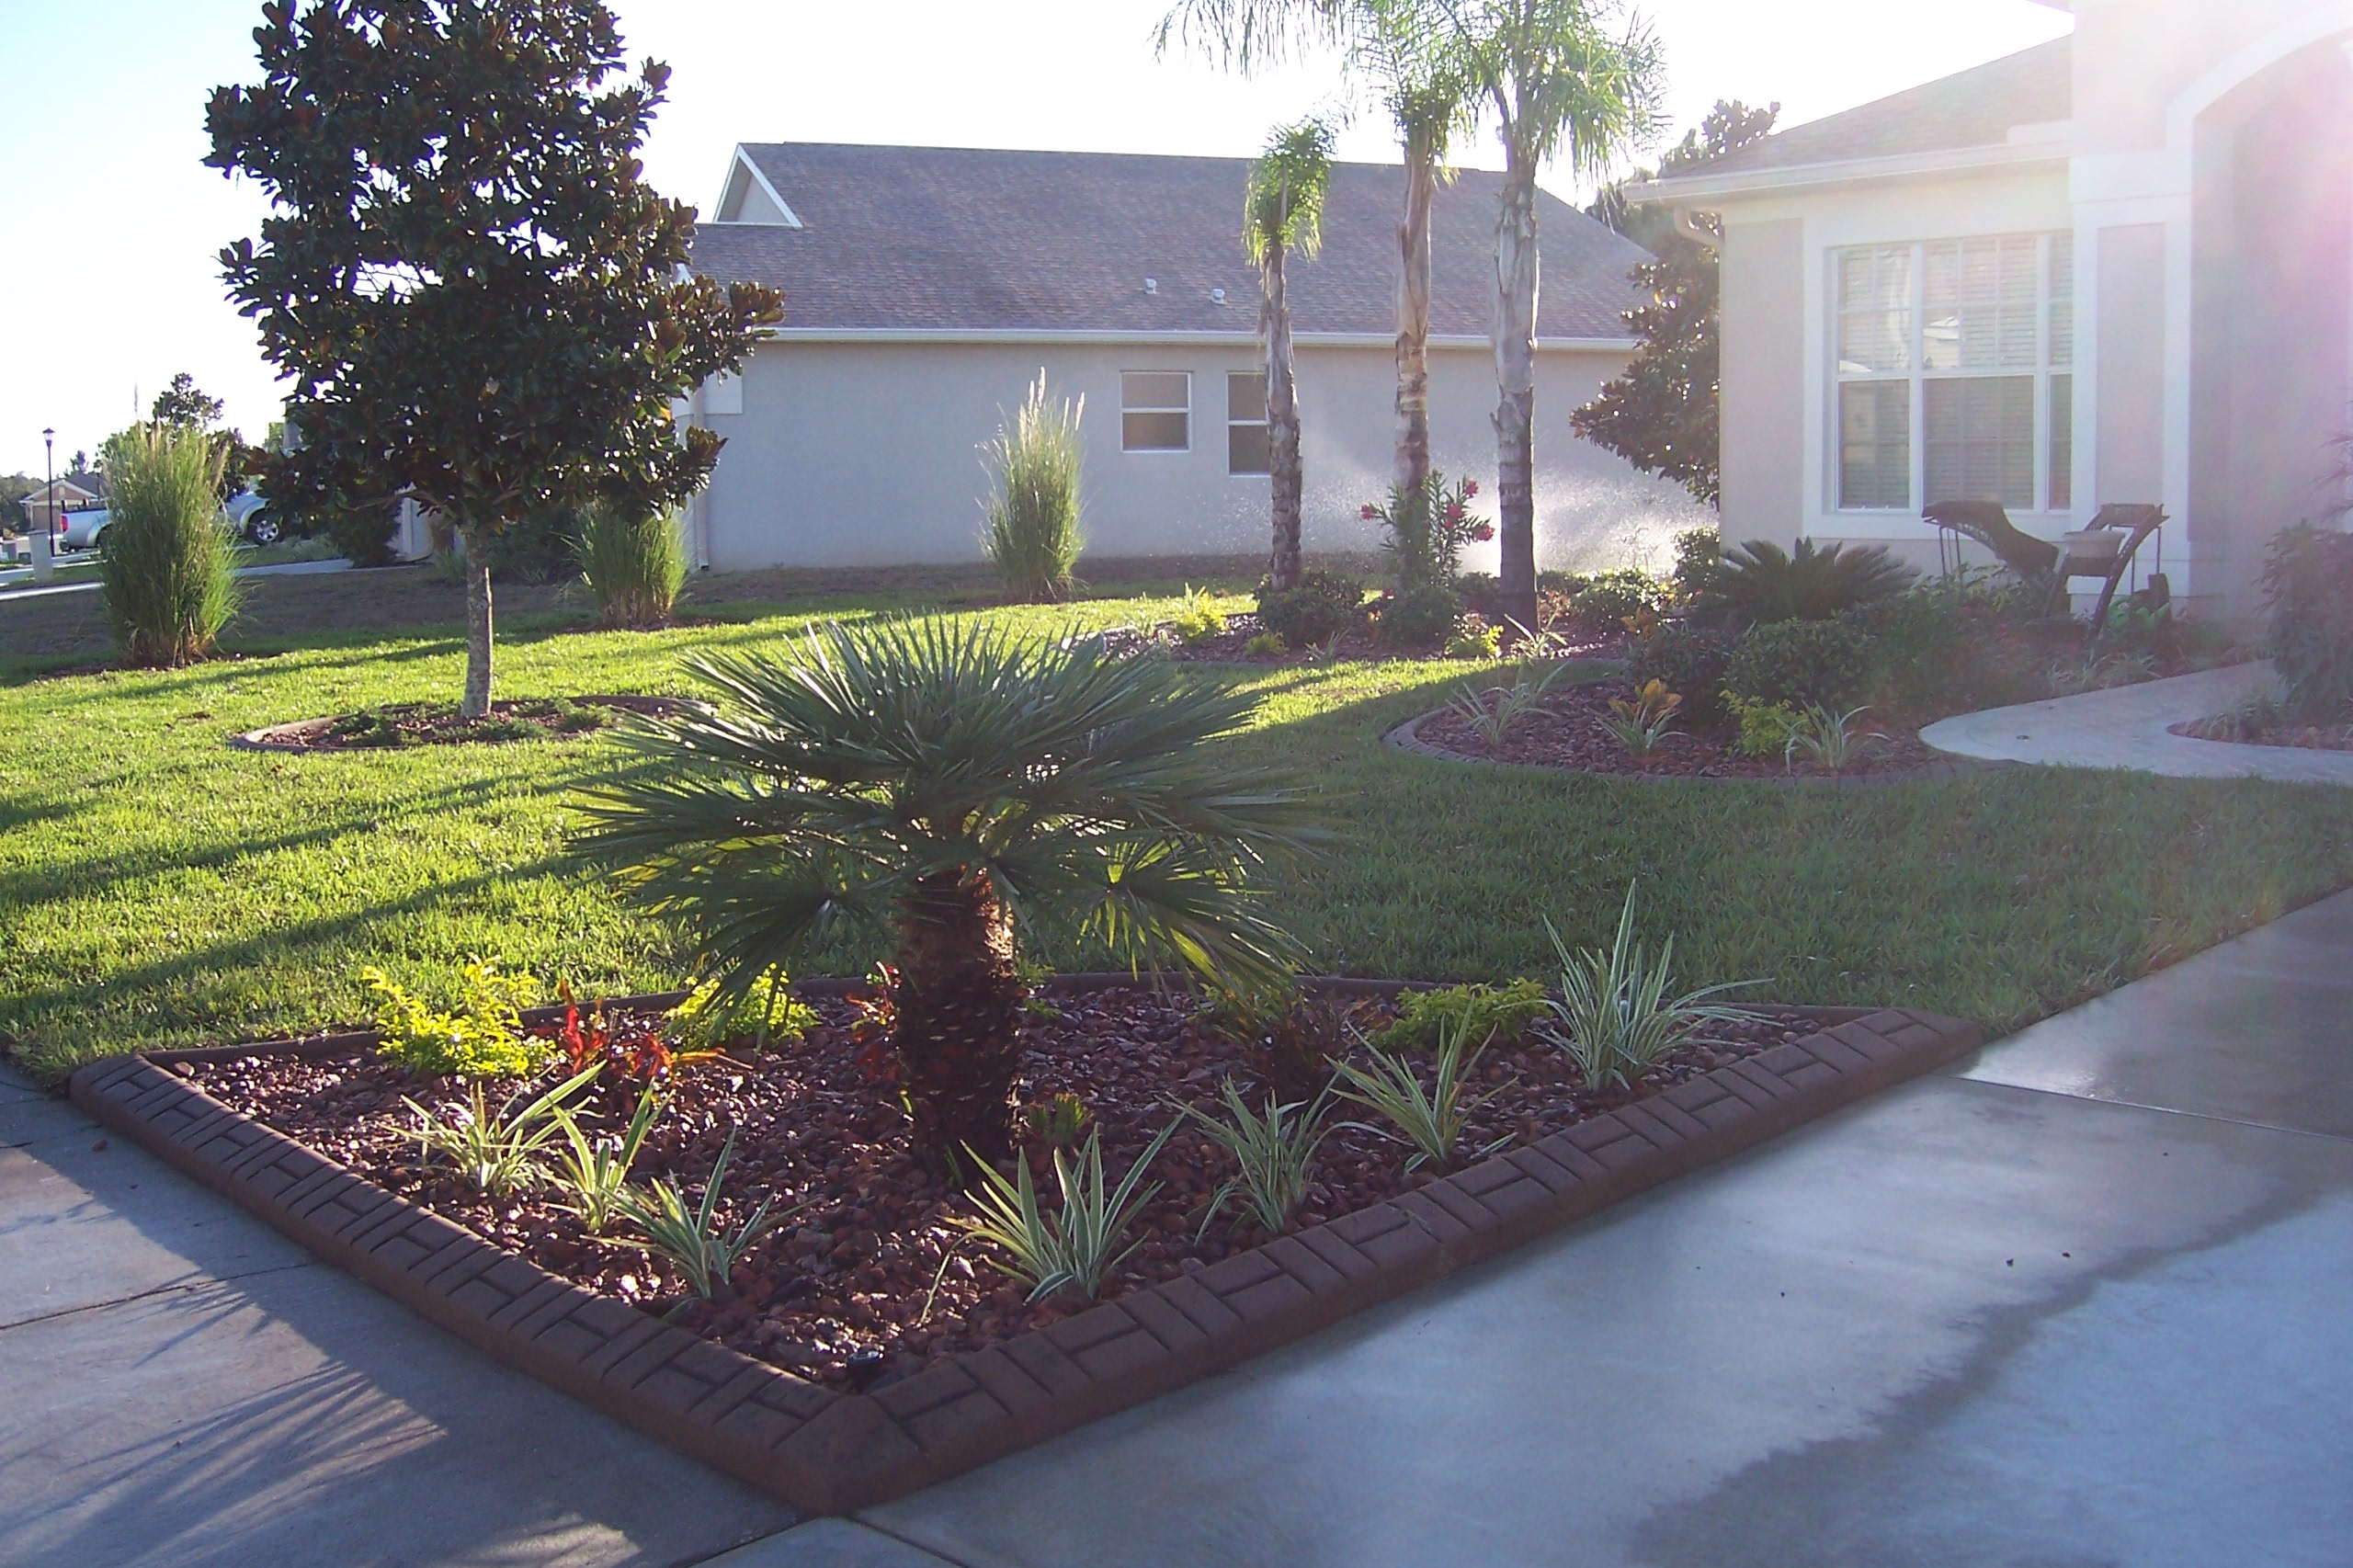 Great new yard by Curb Appeal curbing